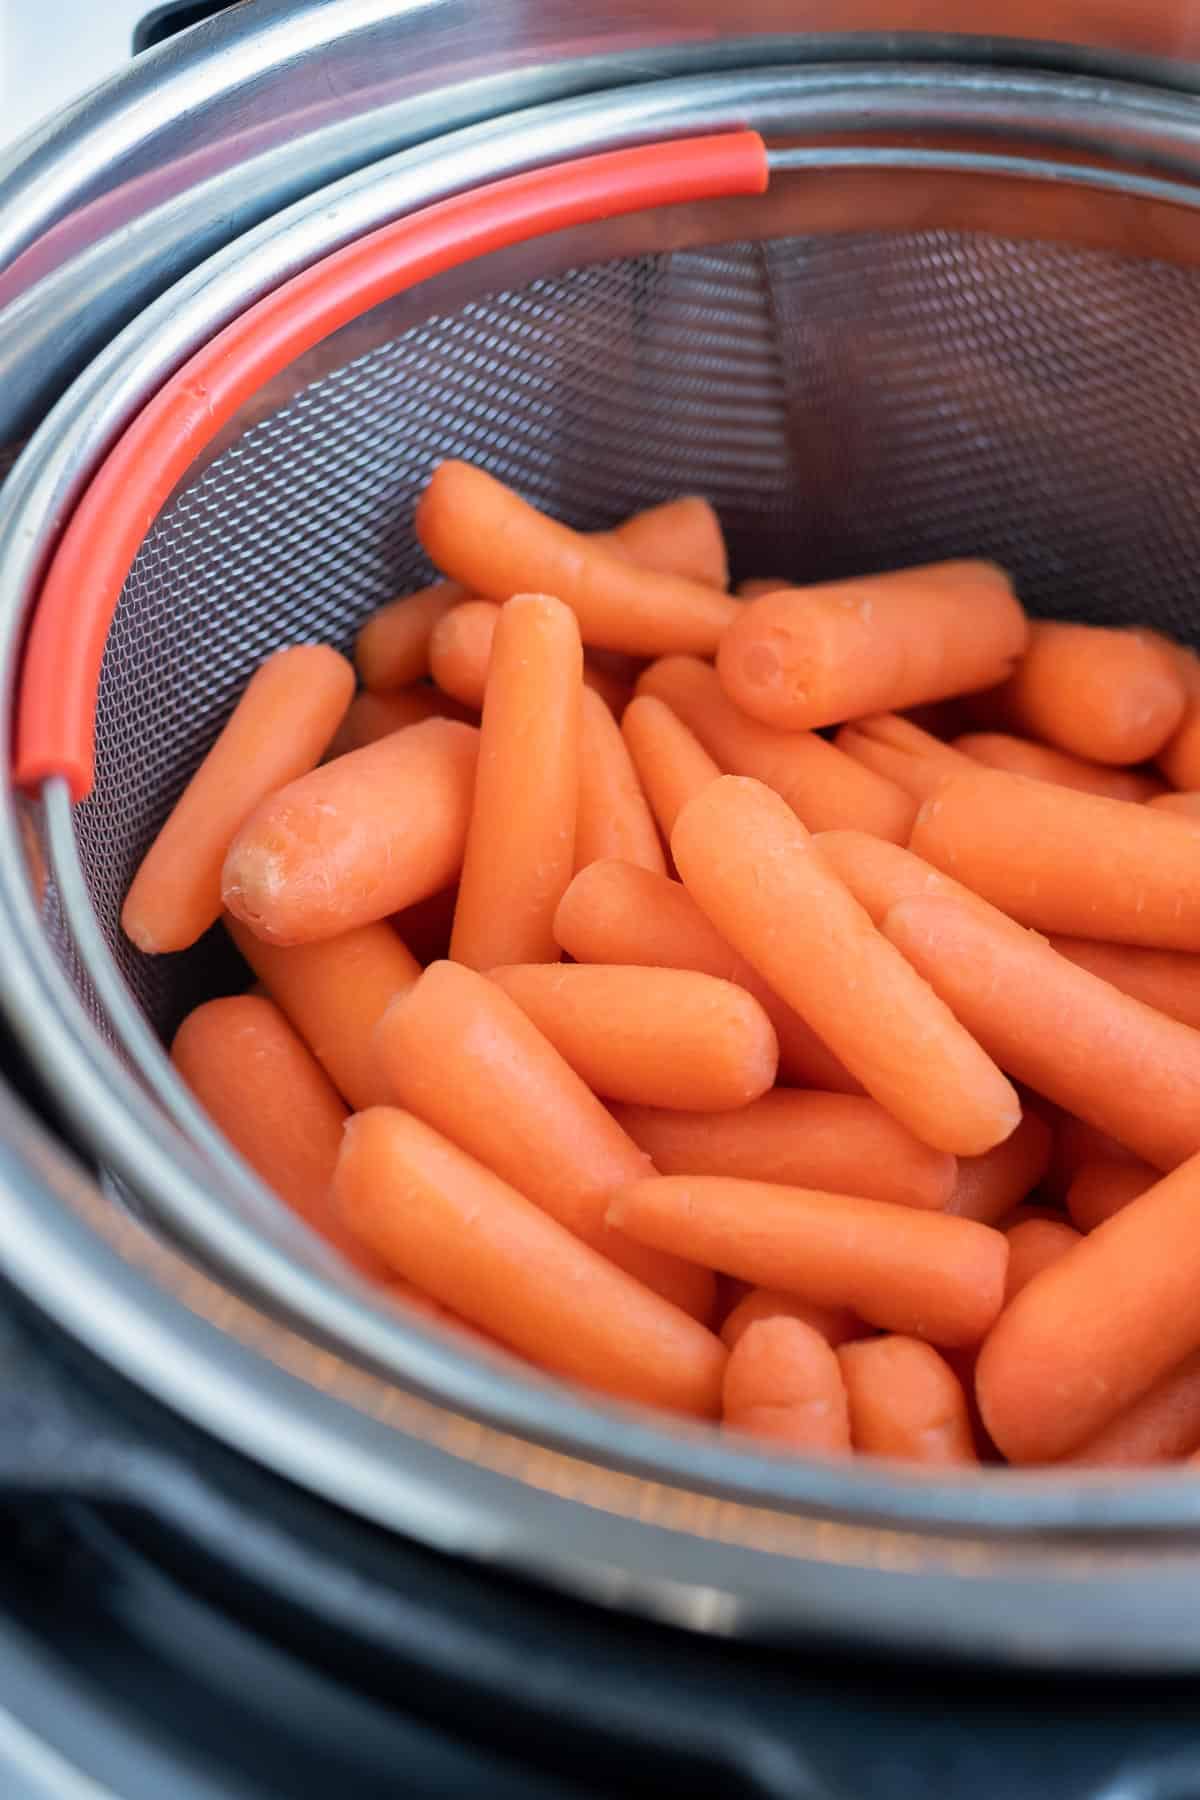 Baby carrots in a strainer are placed inside the isntant pot.